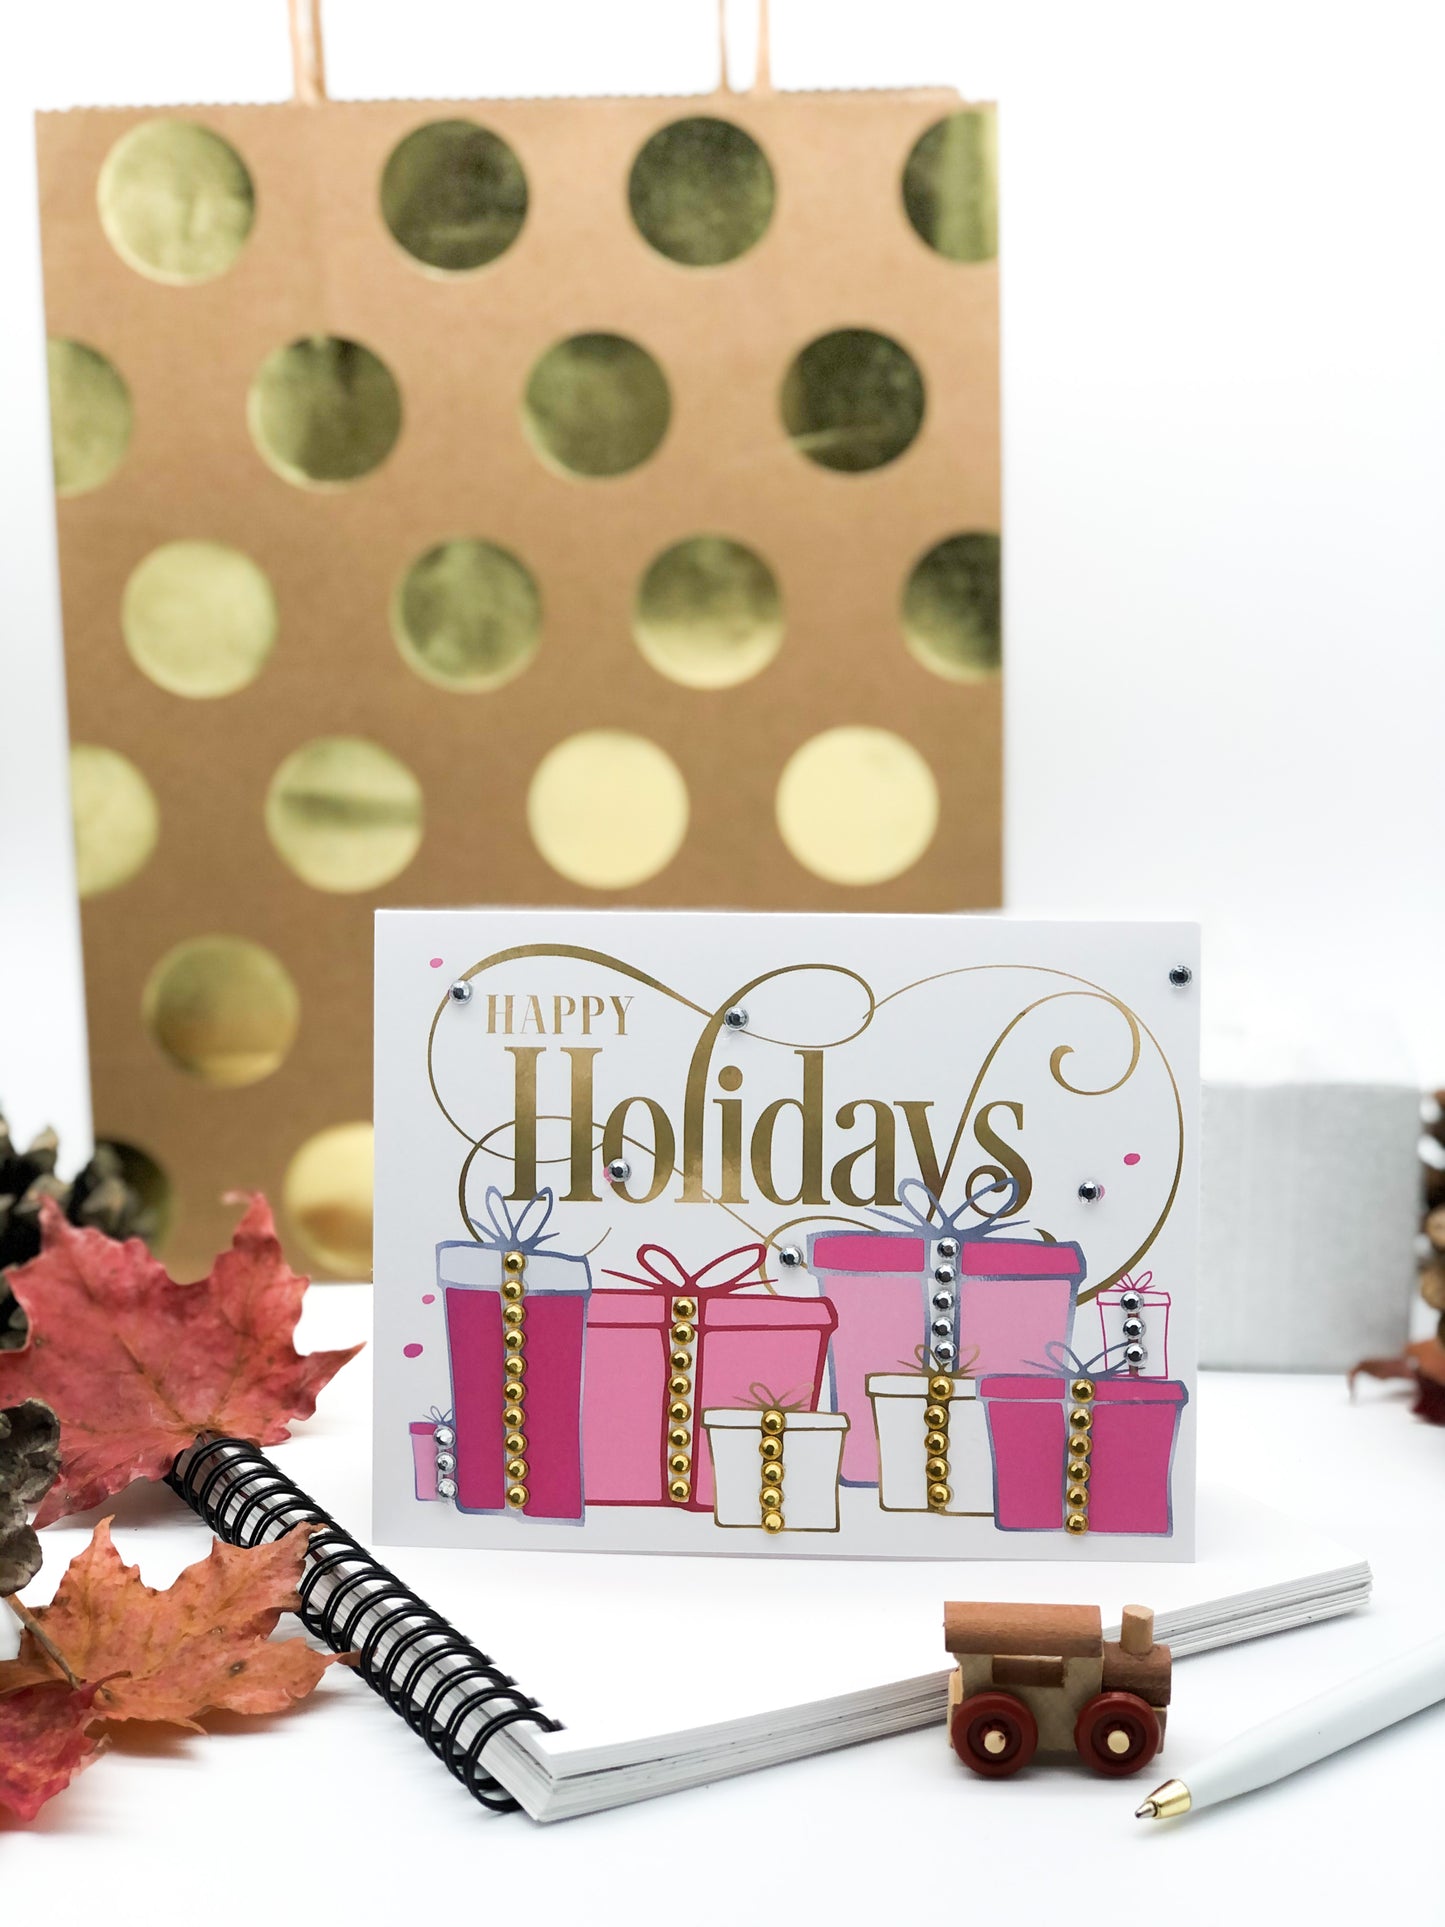 Happy Holiday Greeting Card with pink presents